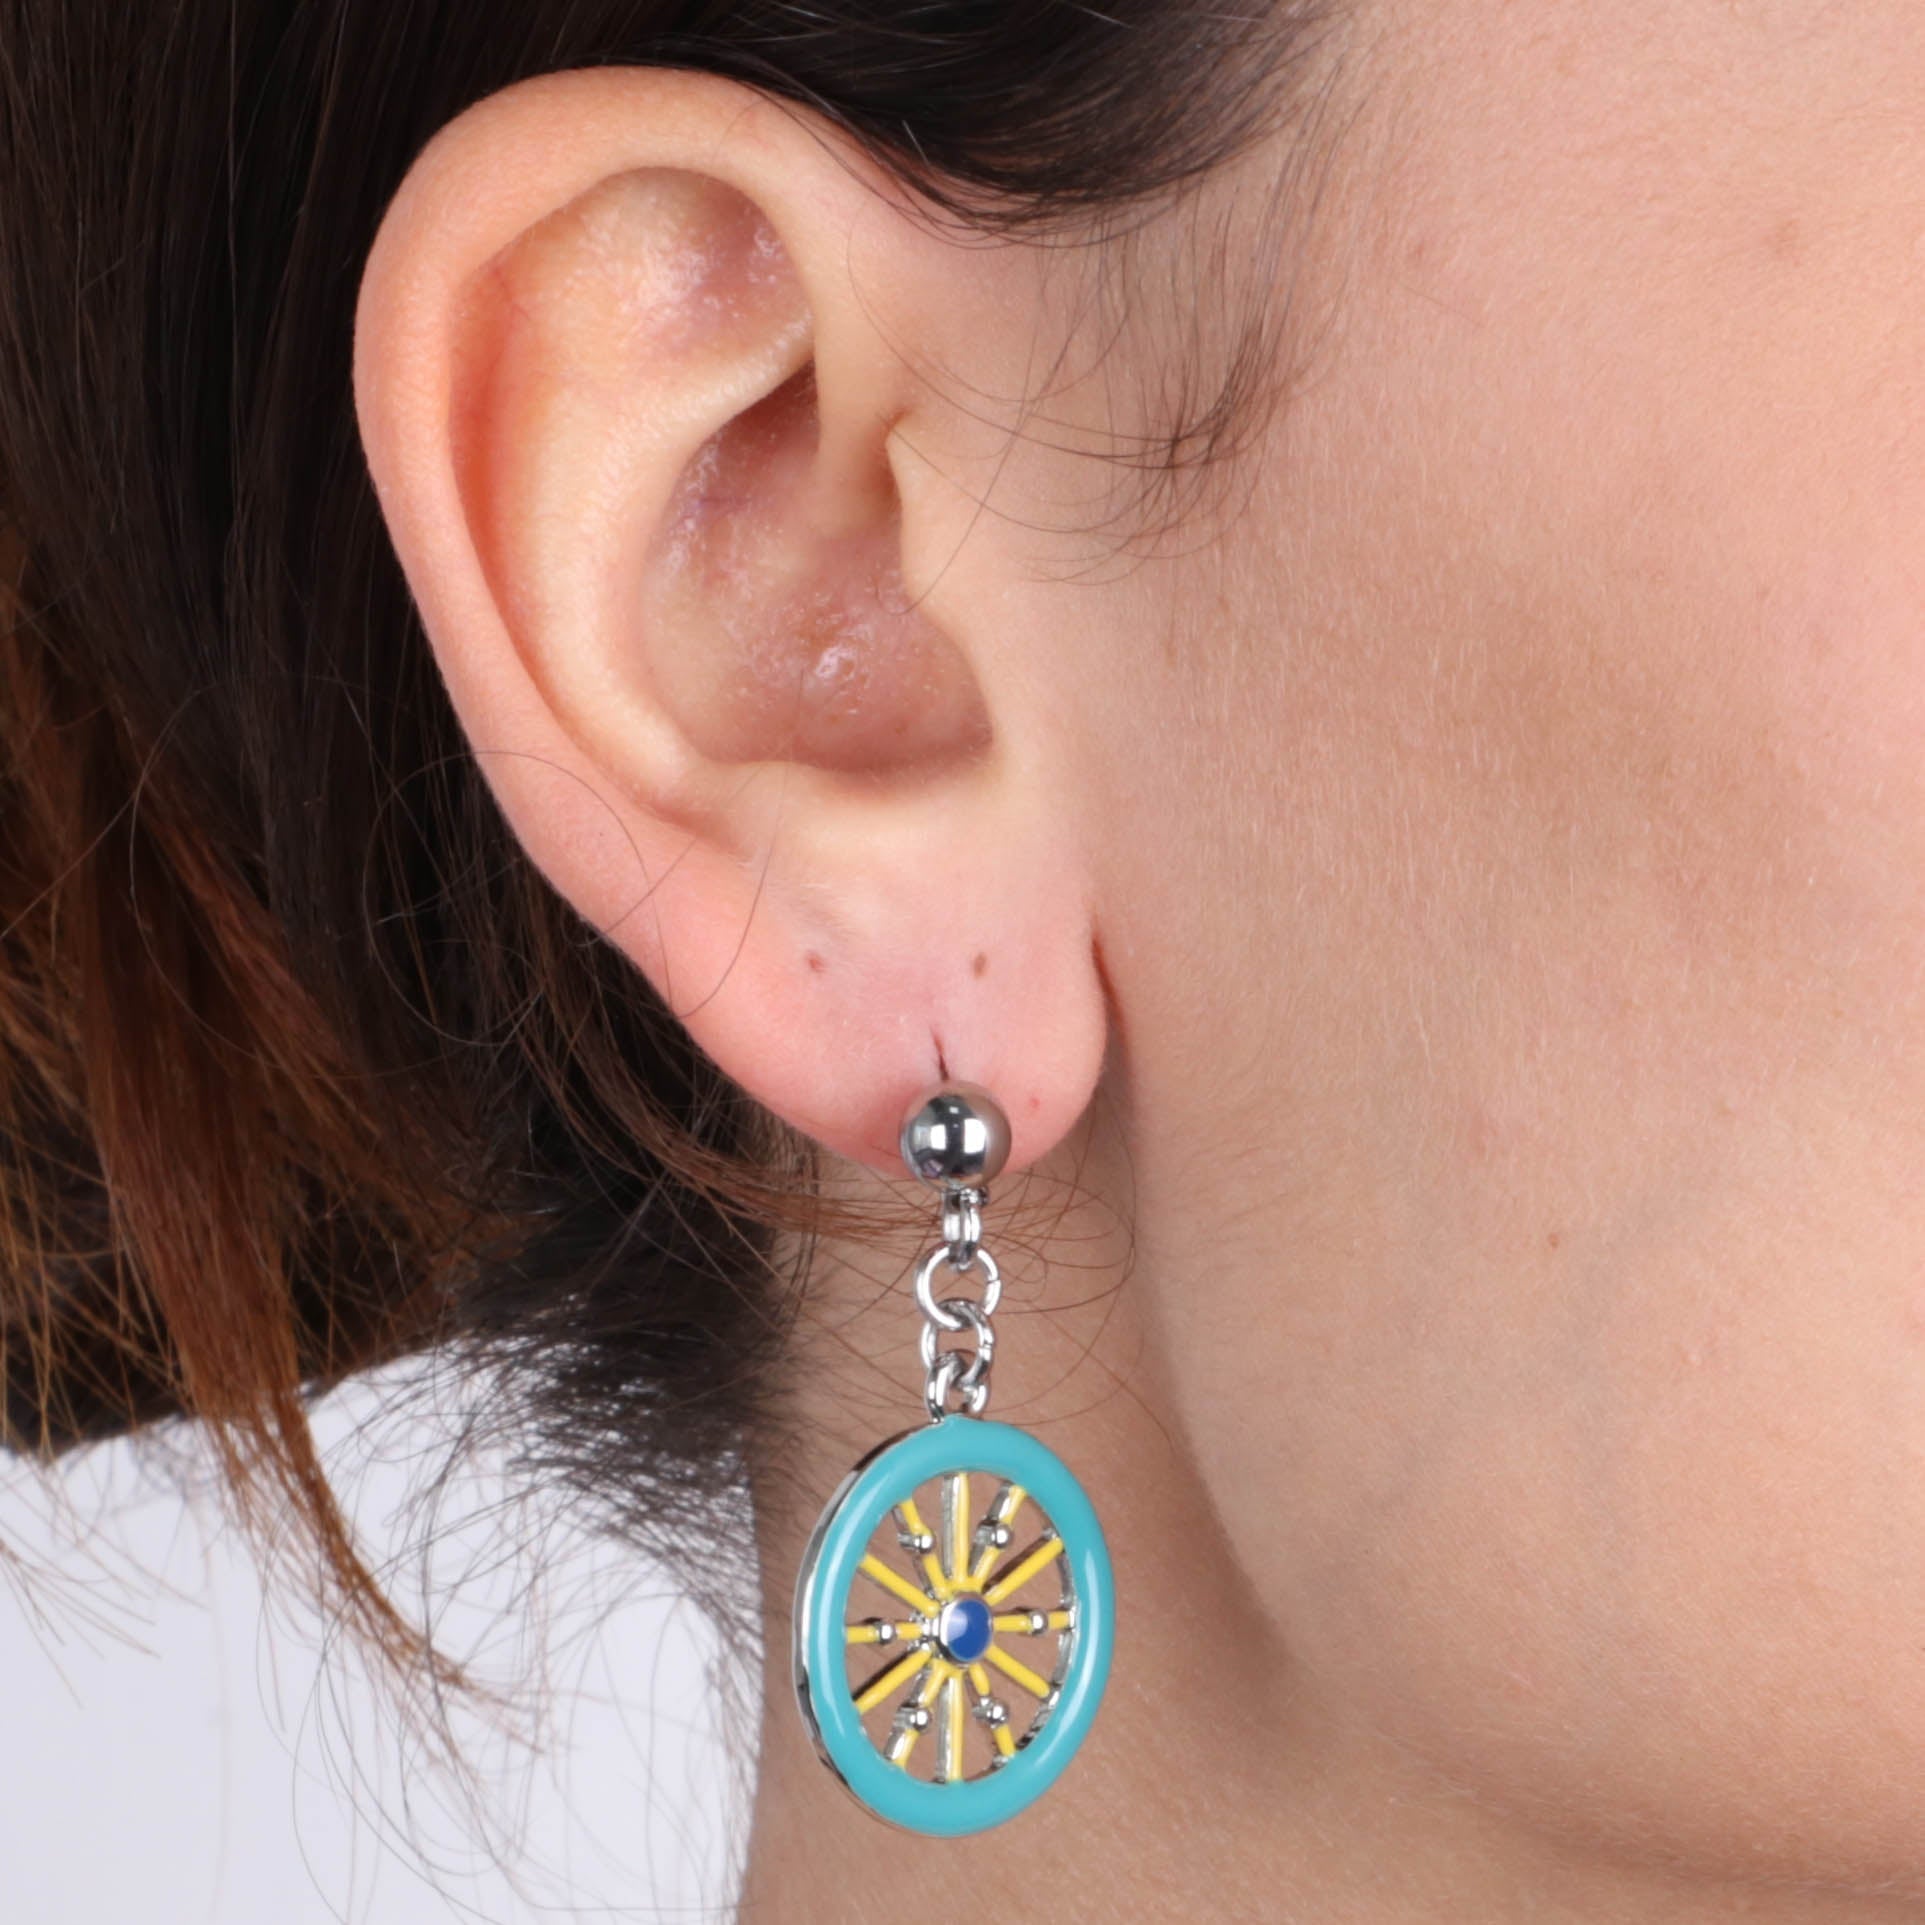 Metal earrings with pendant Sicilian cart wheels, embellished with colored glazes